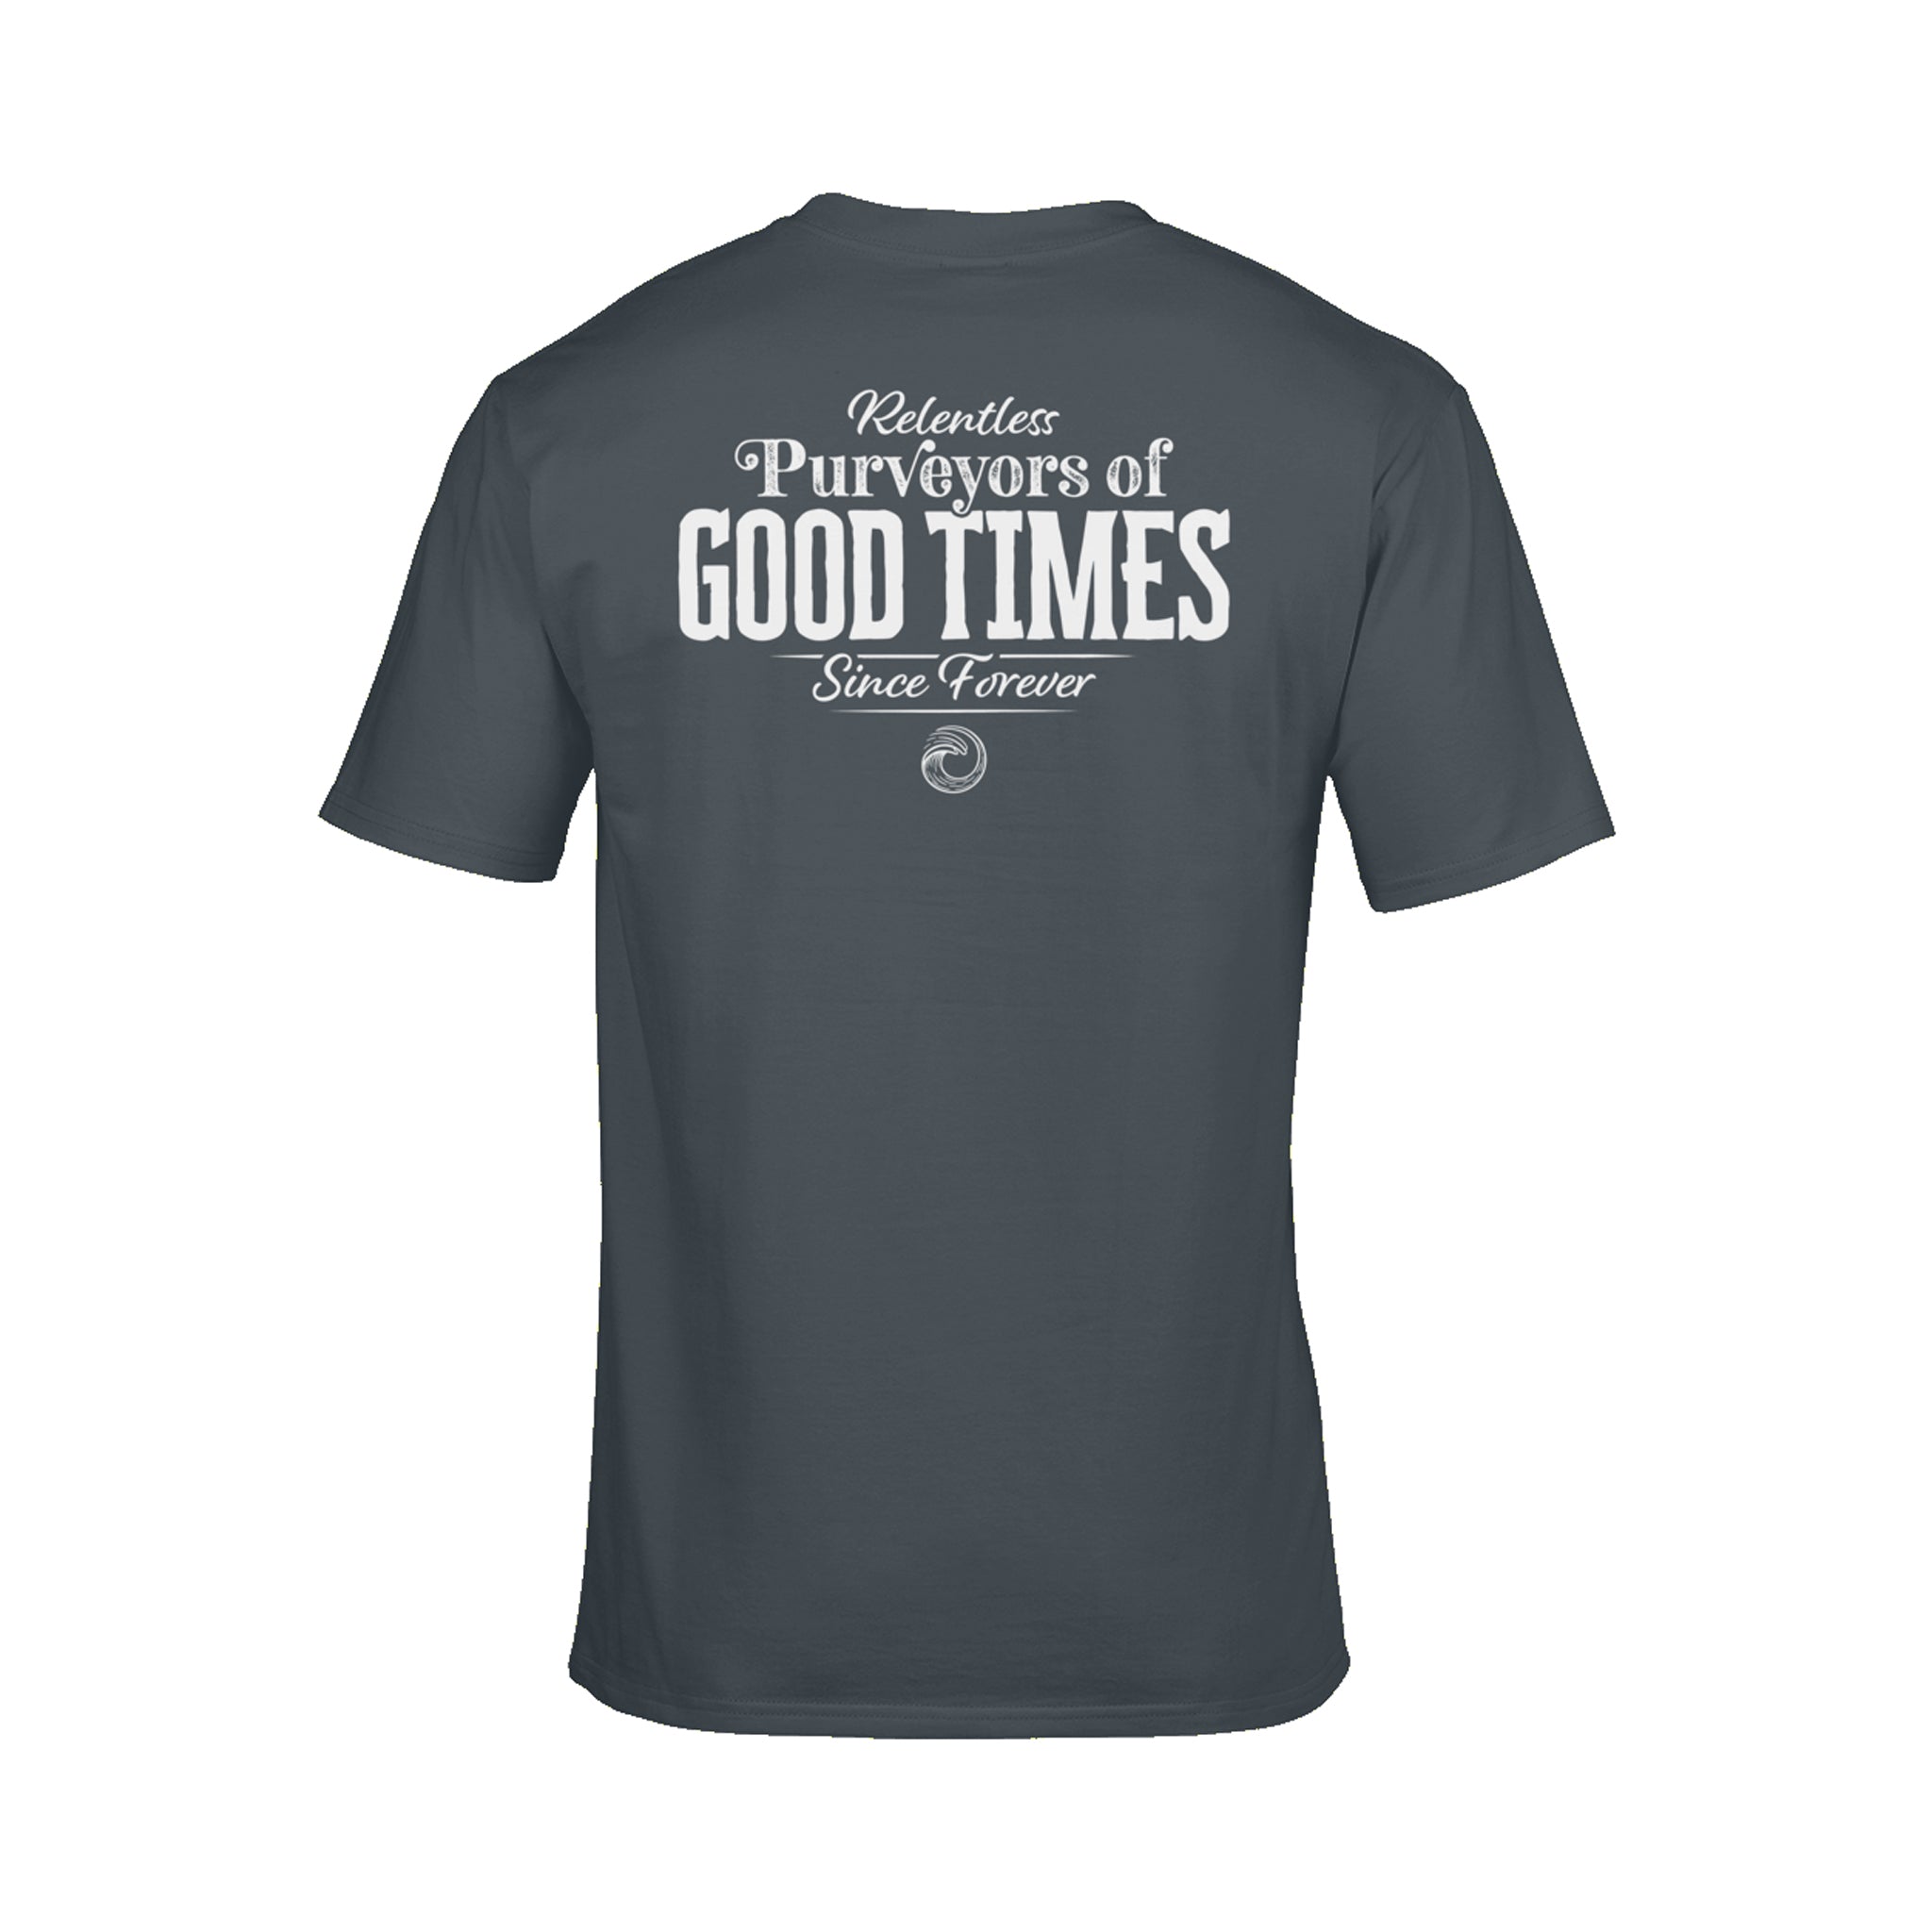 'Good Times' Mens T-Shirt (White Water Edition)